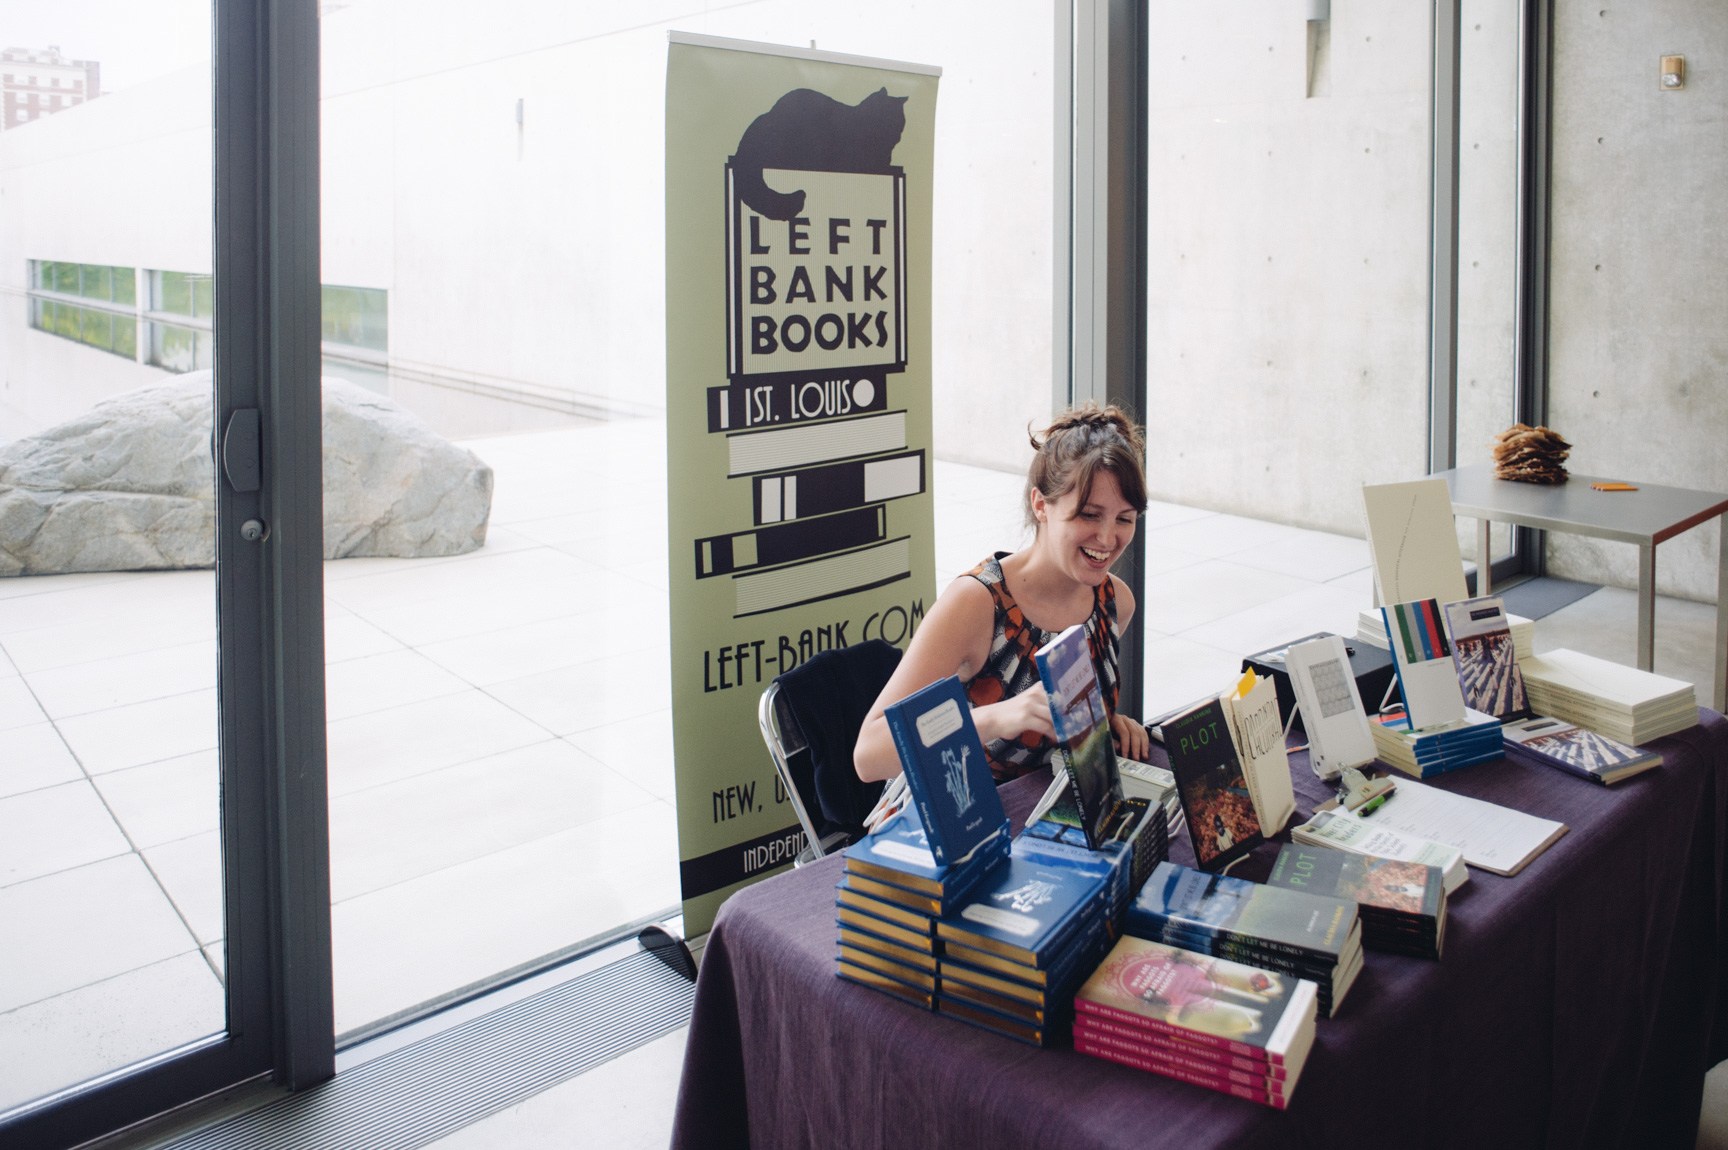 A vendor for Left Bank Books smiles down at their table of displayed literature in front of the Water Court windows.